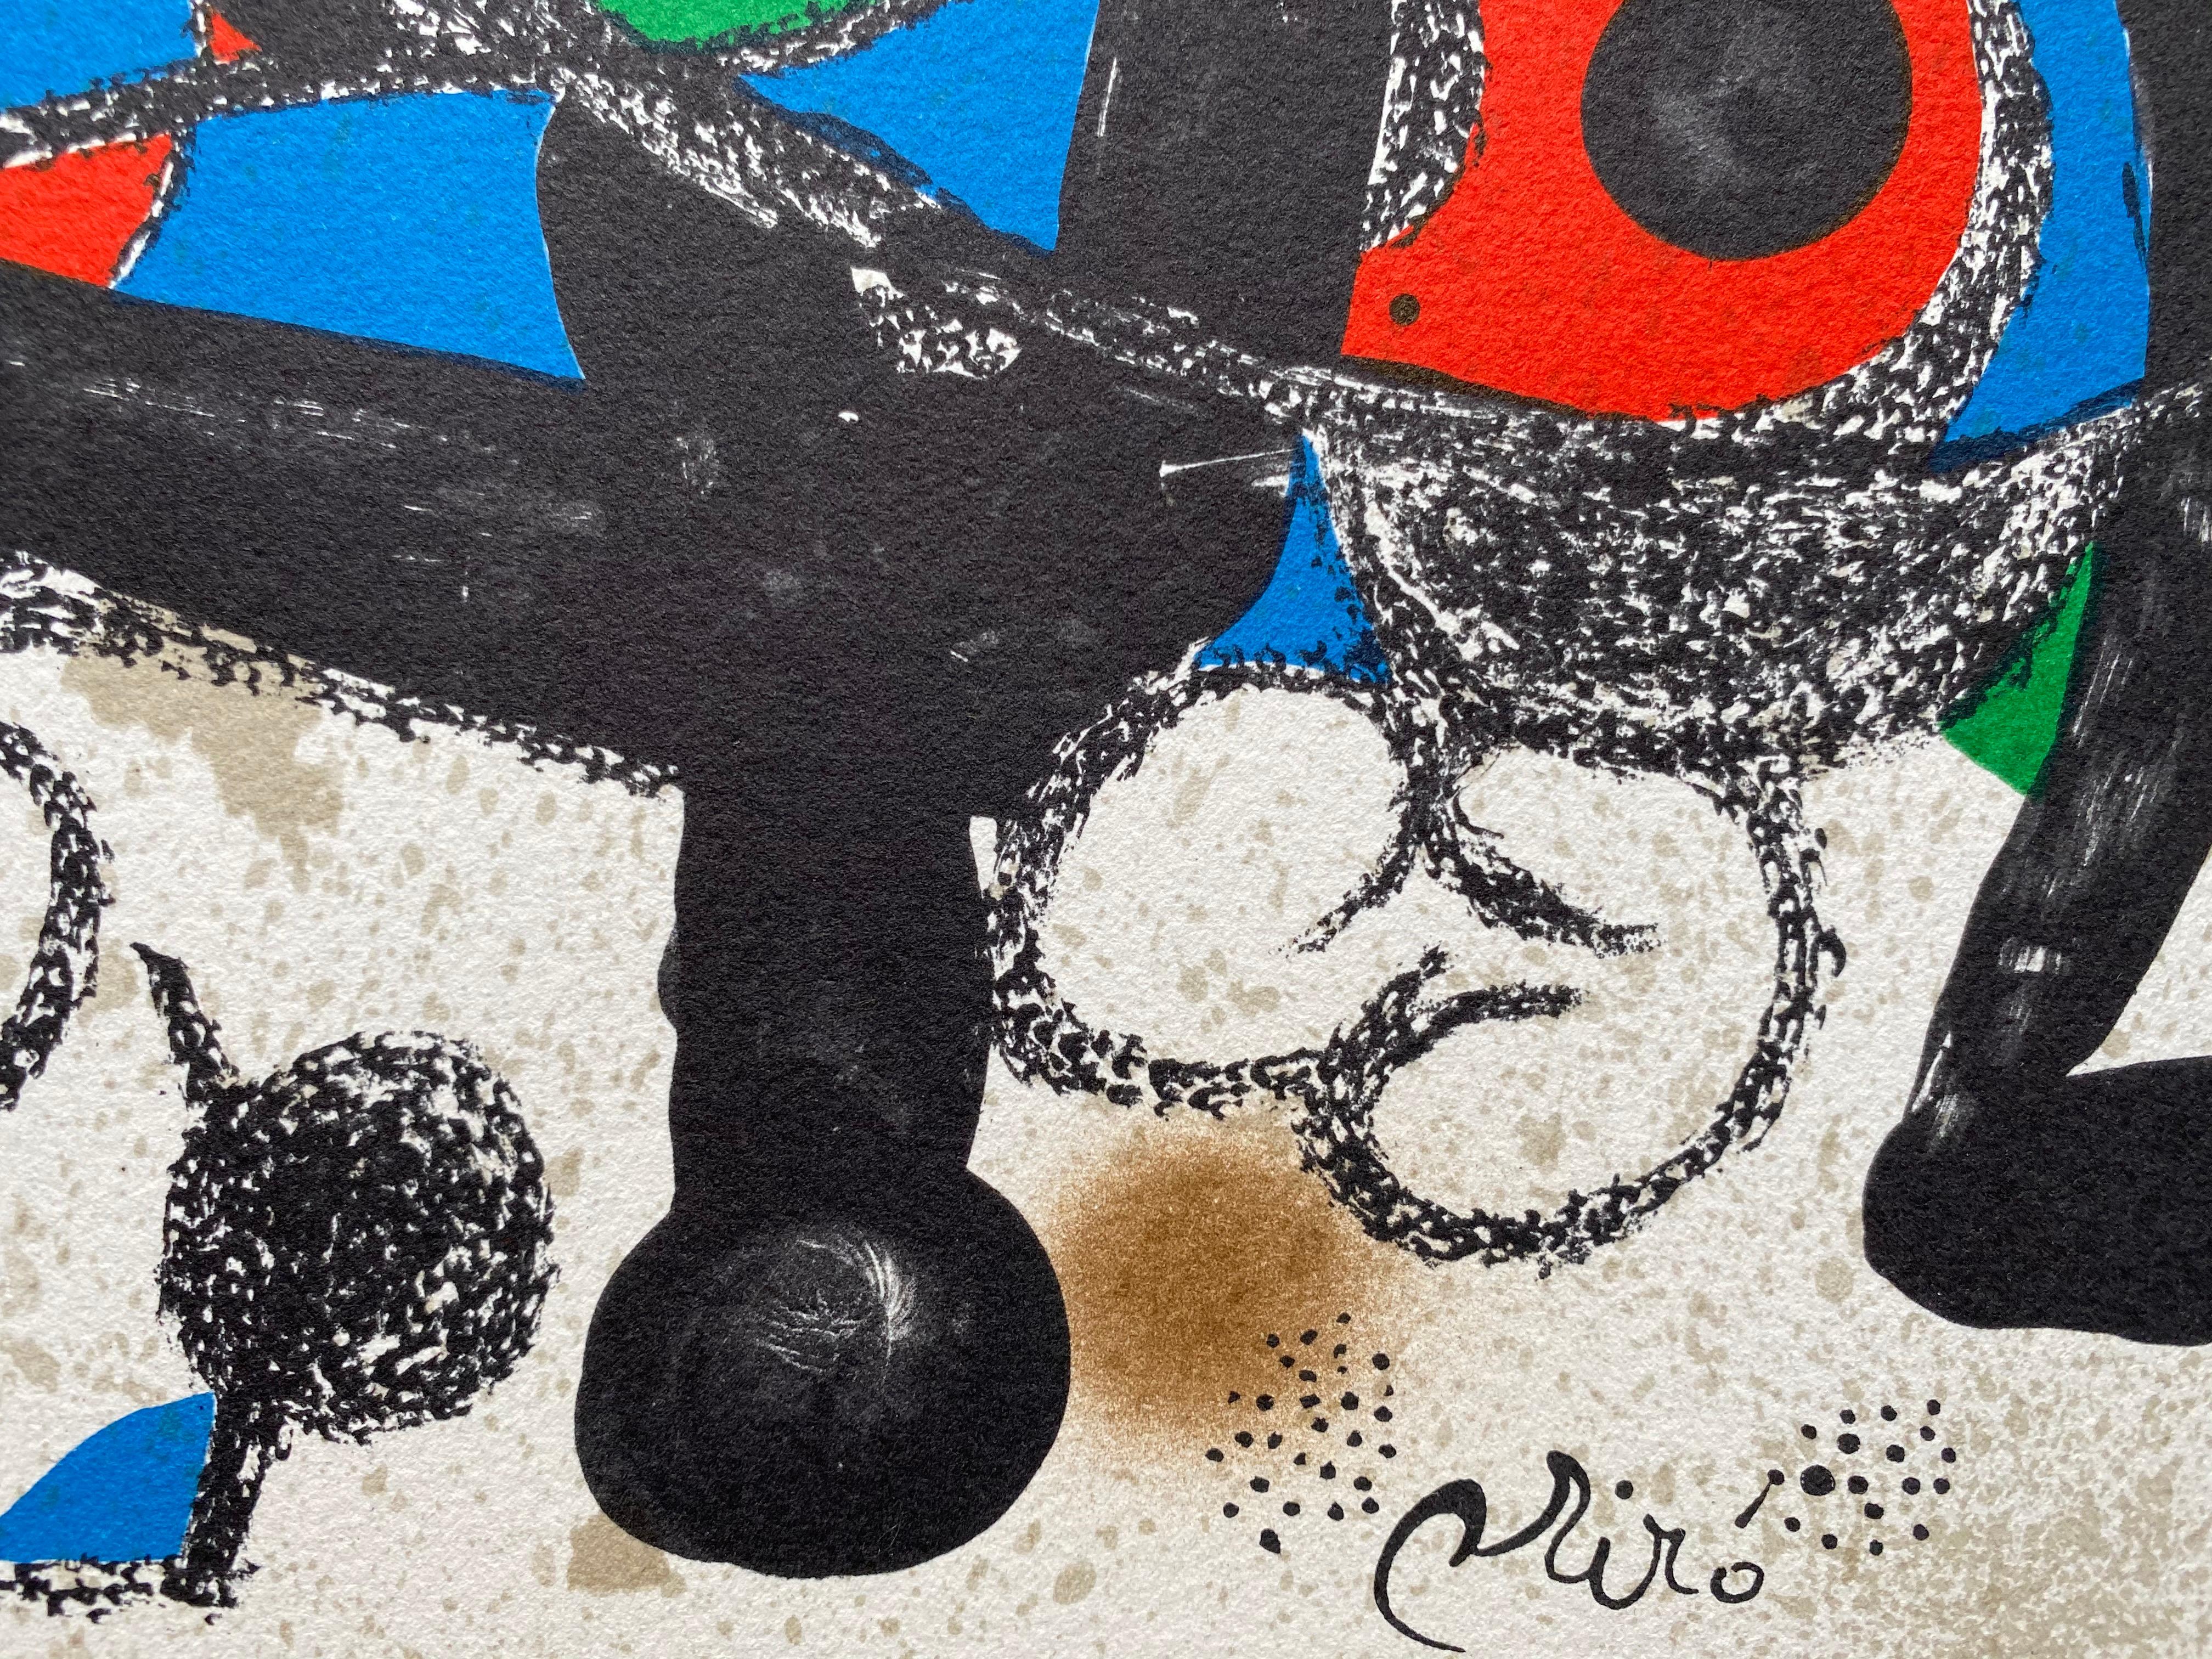 Joan Miró - 
Lithography - 
Miro Sculptor: Spain
original lithograph on Guarro de Miro Joan paper,
signed on the plate.
Edition in 1500 copies.
circa 1972
Dimensions of the work: 40 cm x 20 cm
each referenced in the catalogue raisonné of the